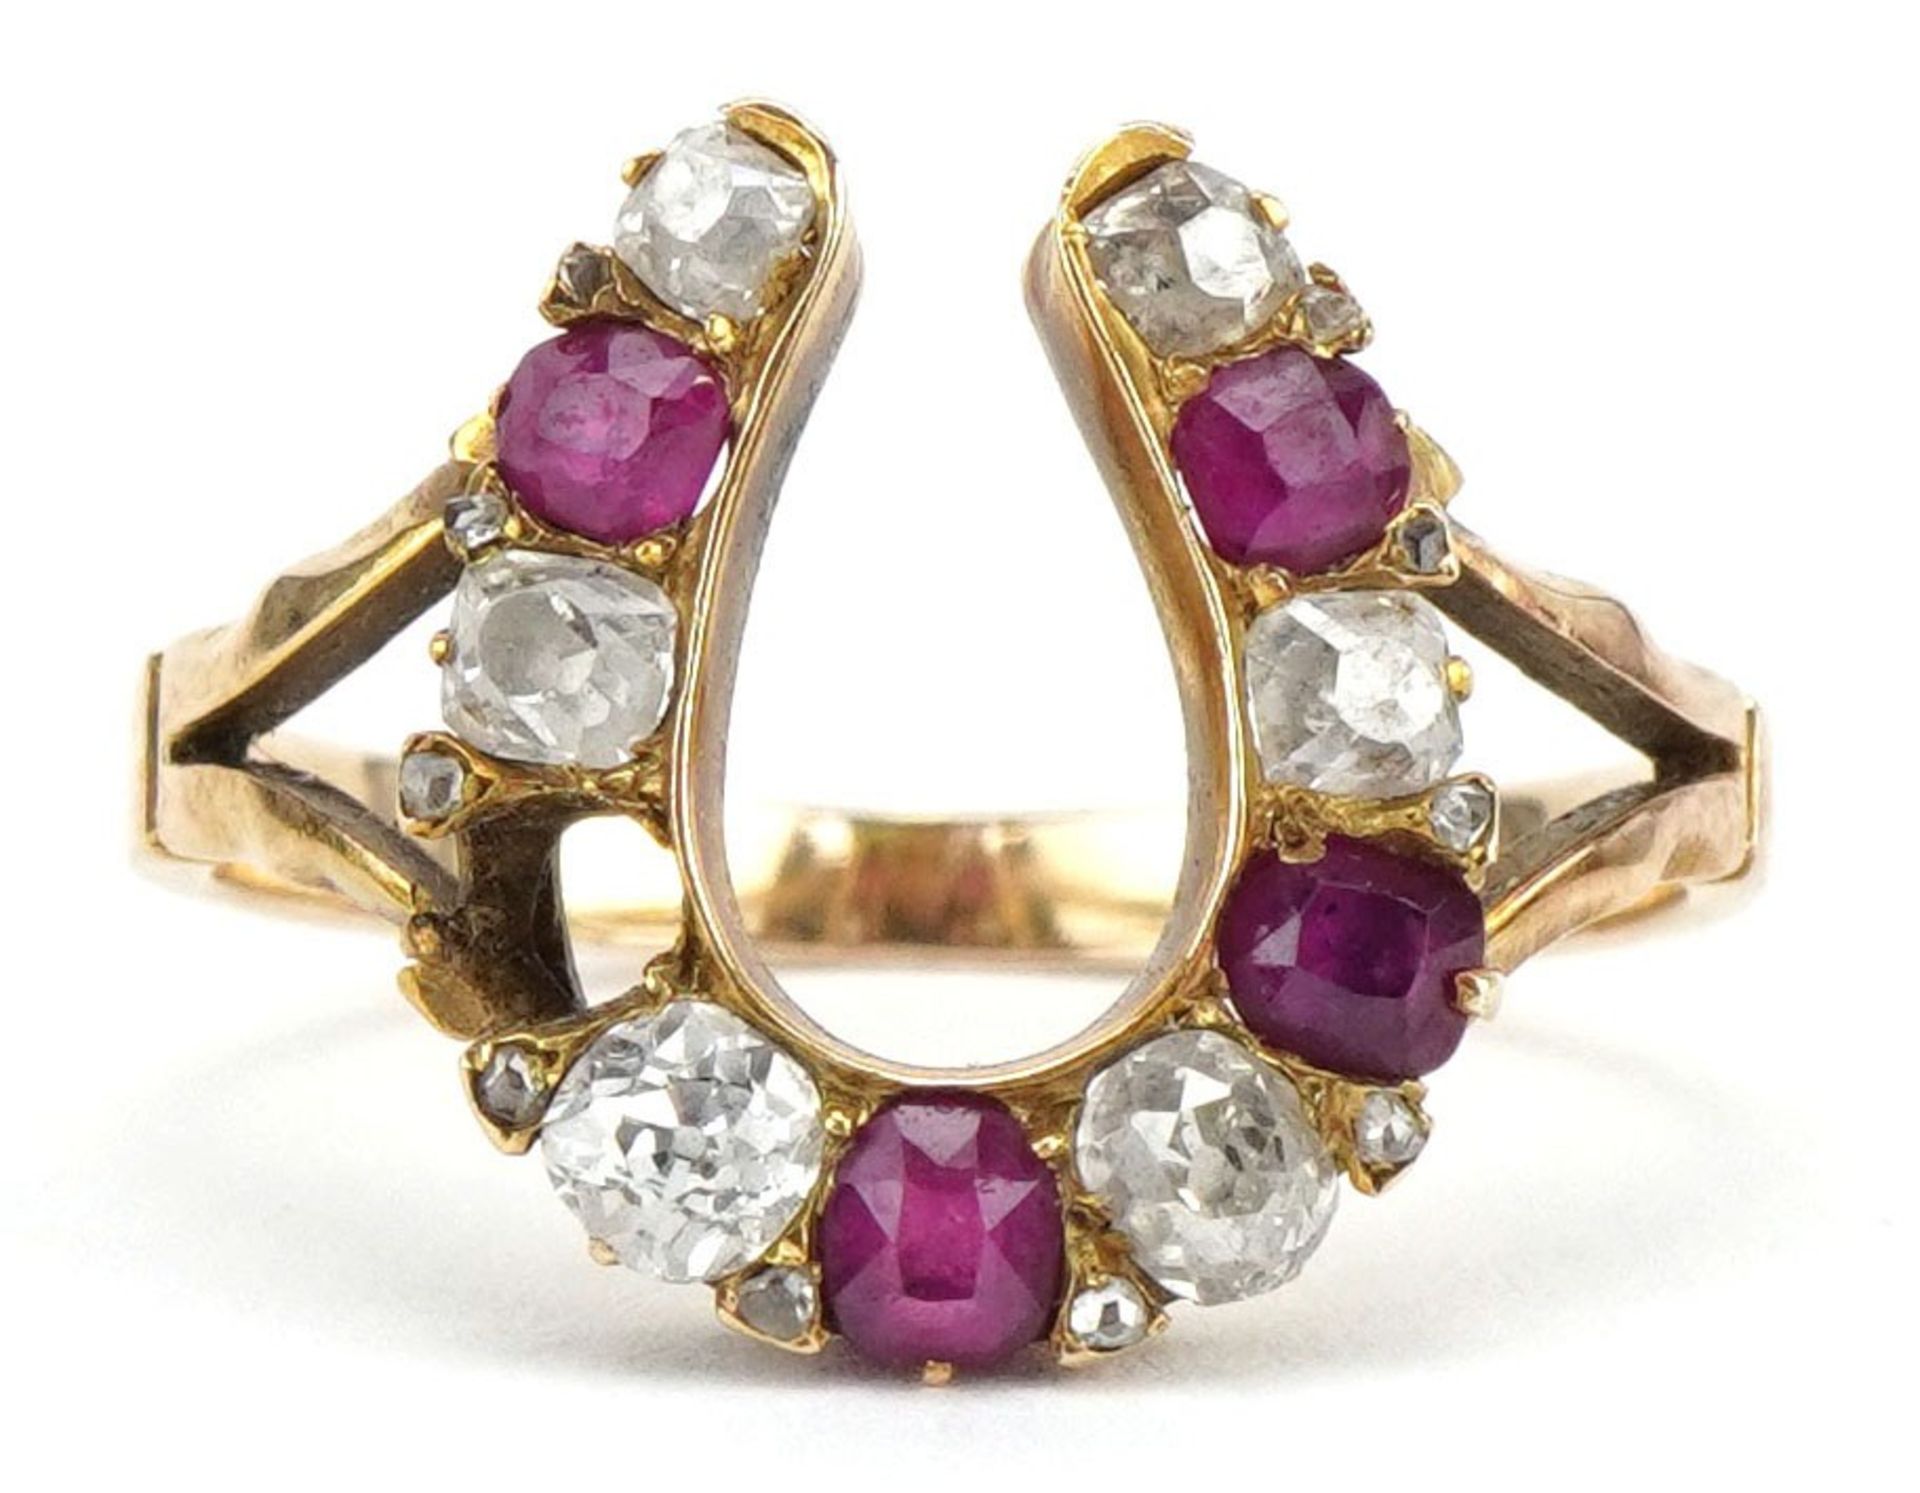 19th century unmarked gold diamond and ruby horseshoe ring, tests as 18ct gold, the largest